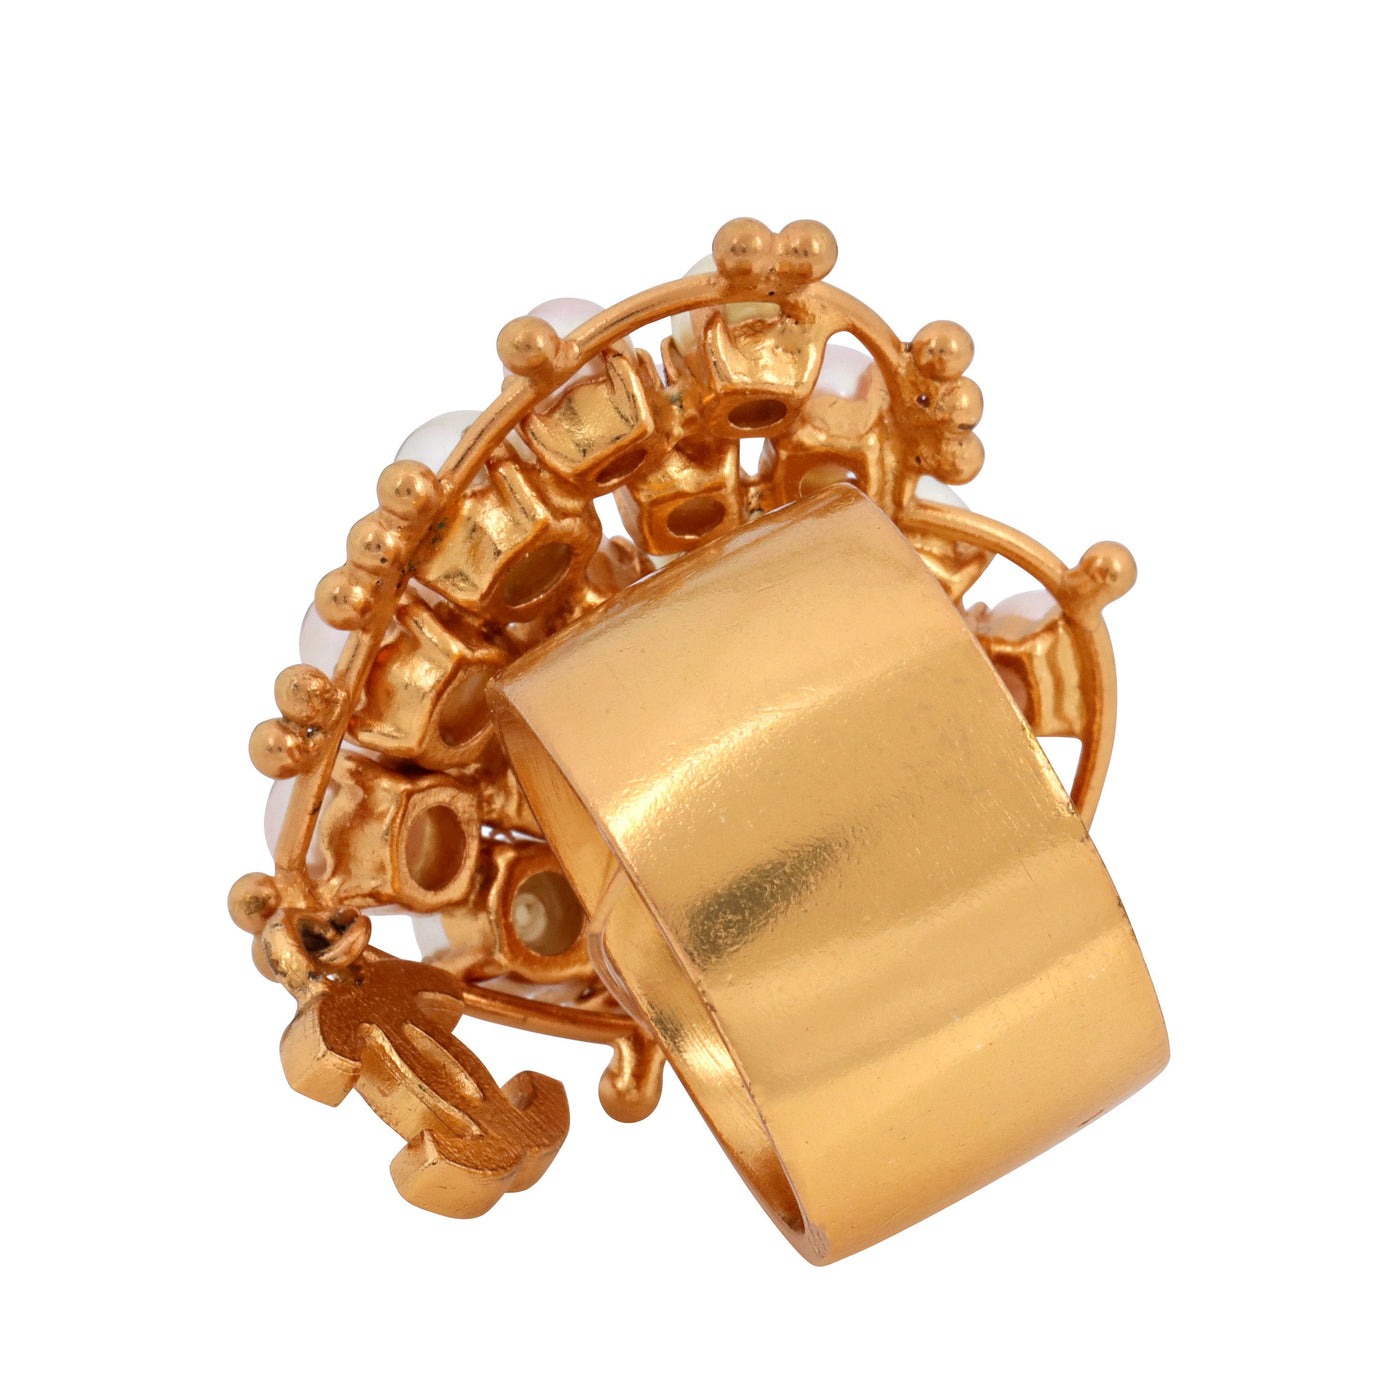 Chanel Gold Heart & Pearl Ring w/ CC Drip (Size 6)